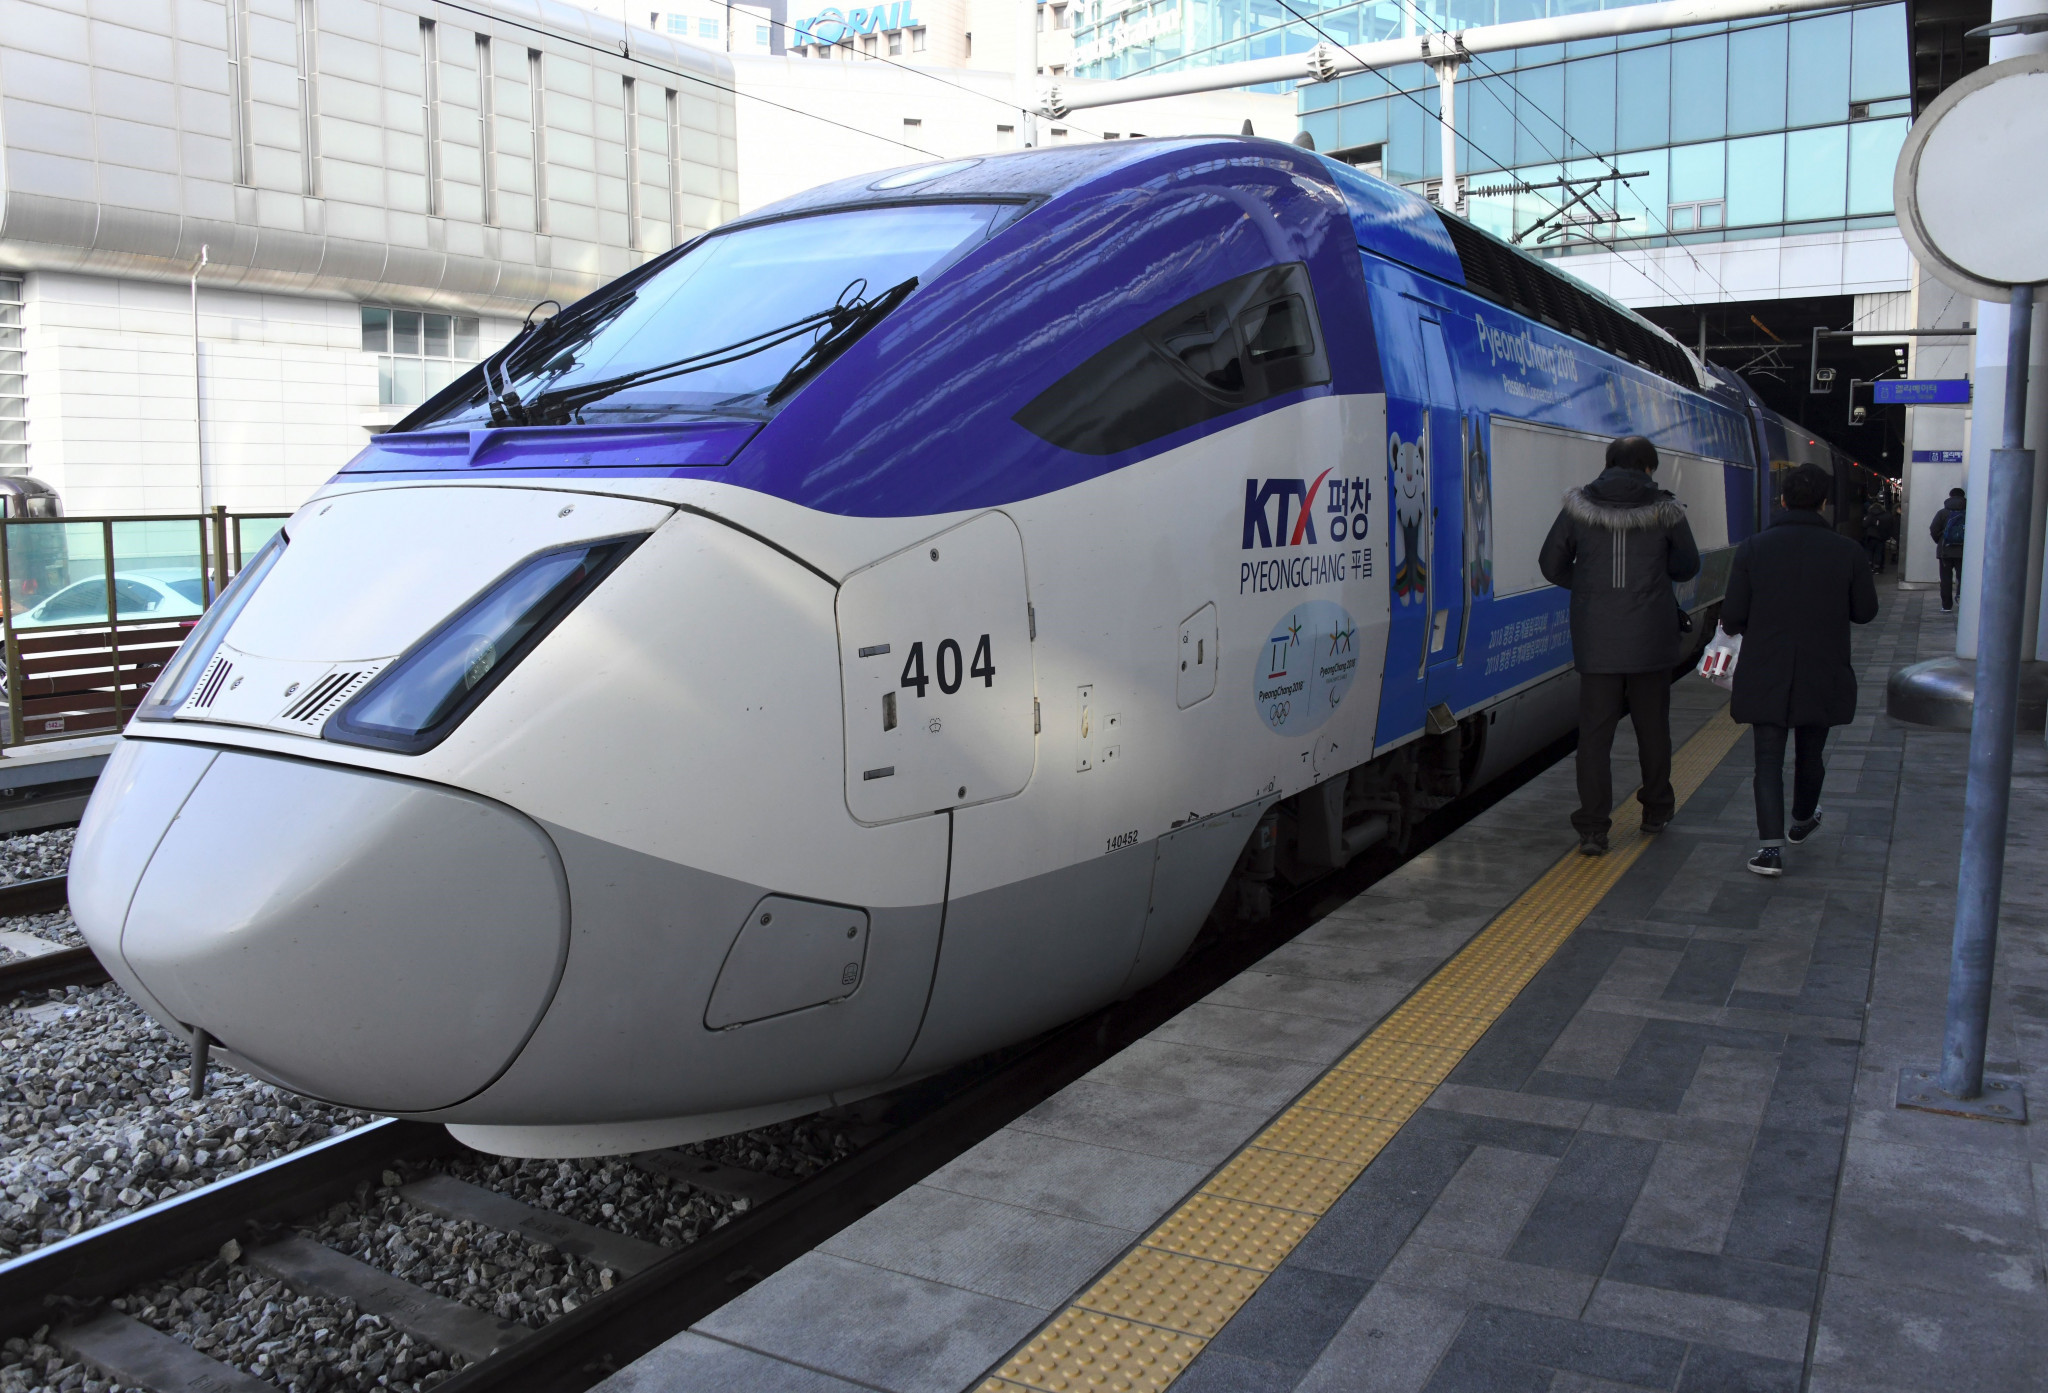 The Pyeongchang 2018 Organising Committee claim that the opening of the new high-speed railway will increase ticket sales for next year's Games ©Getty Images